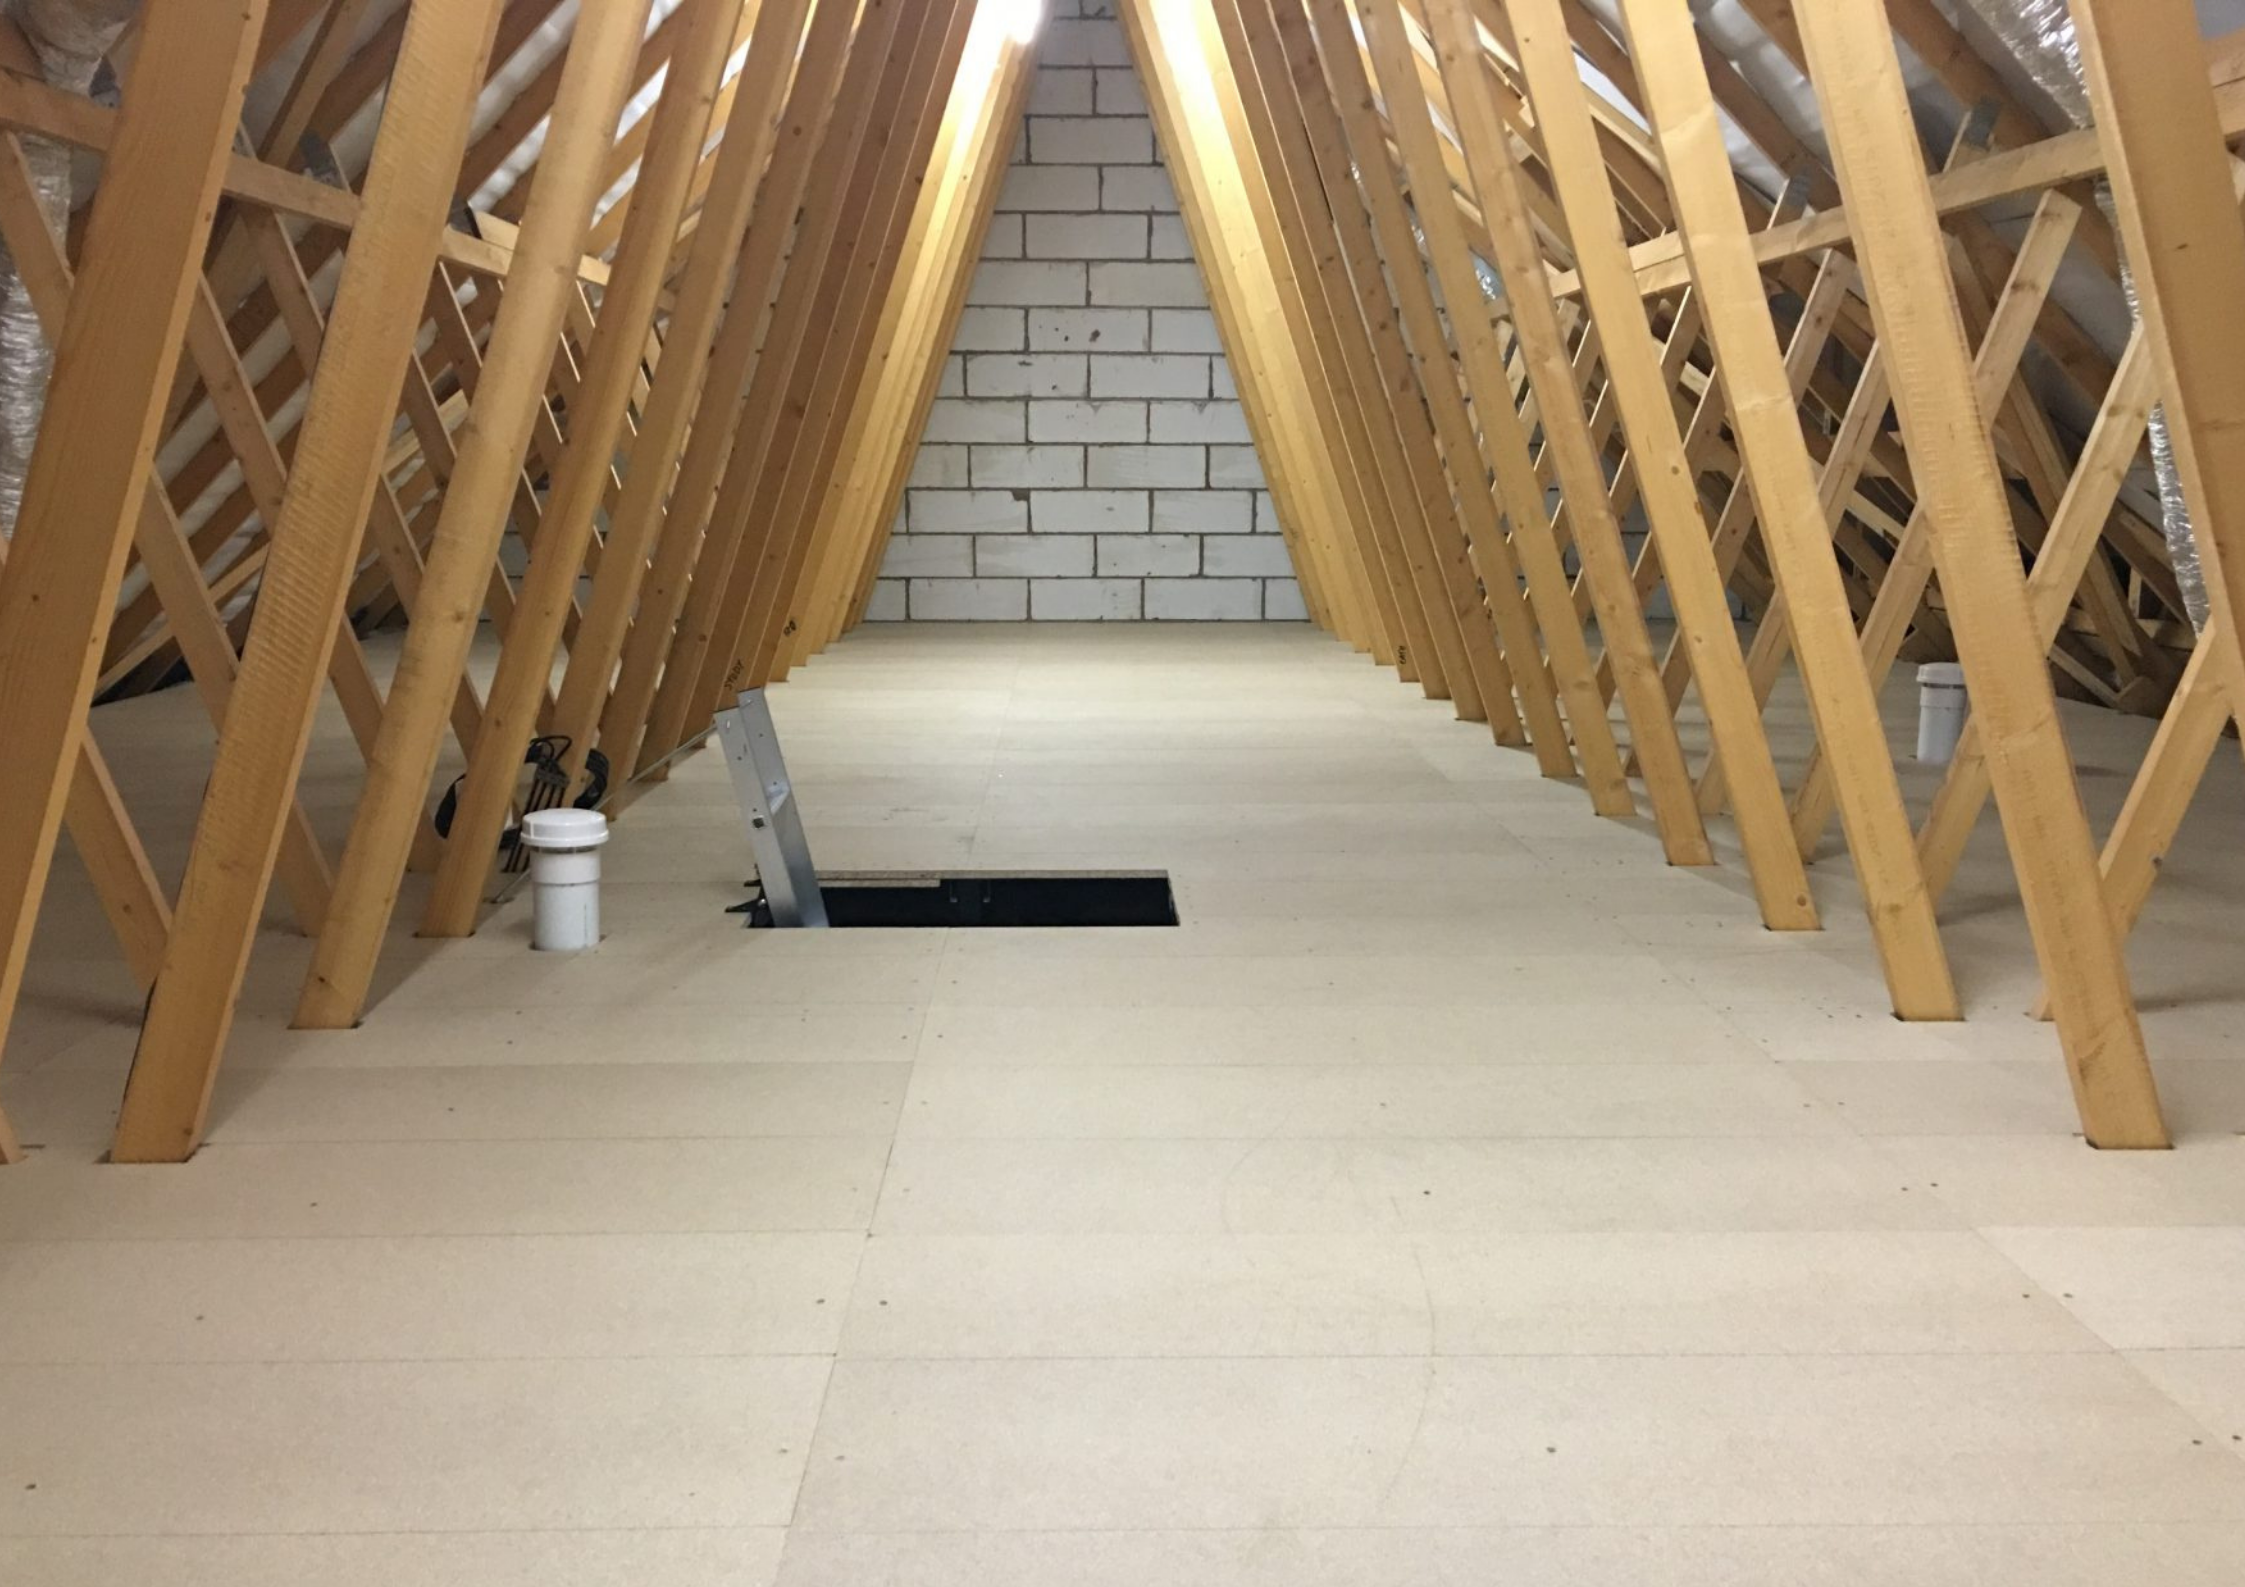 Can You Put Loft Boards on Joists?